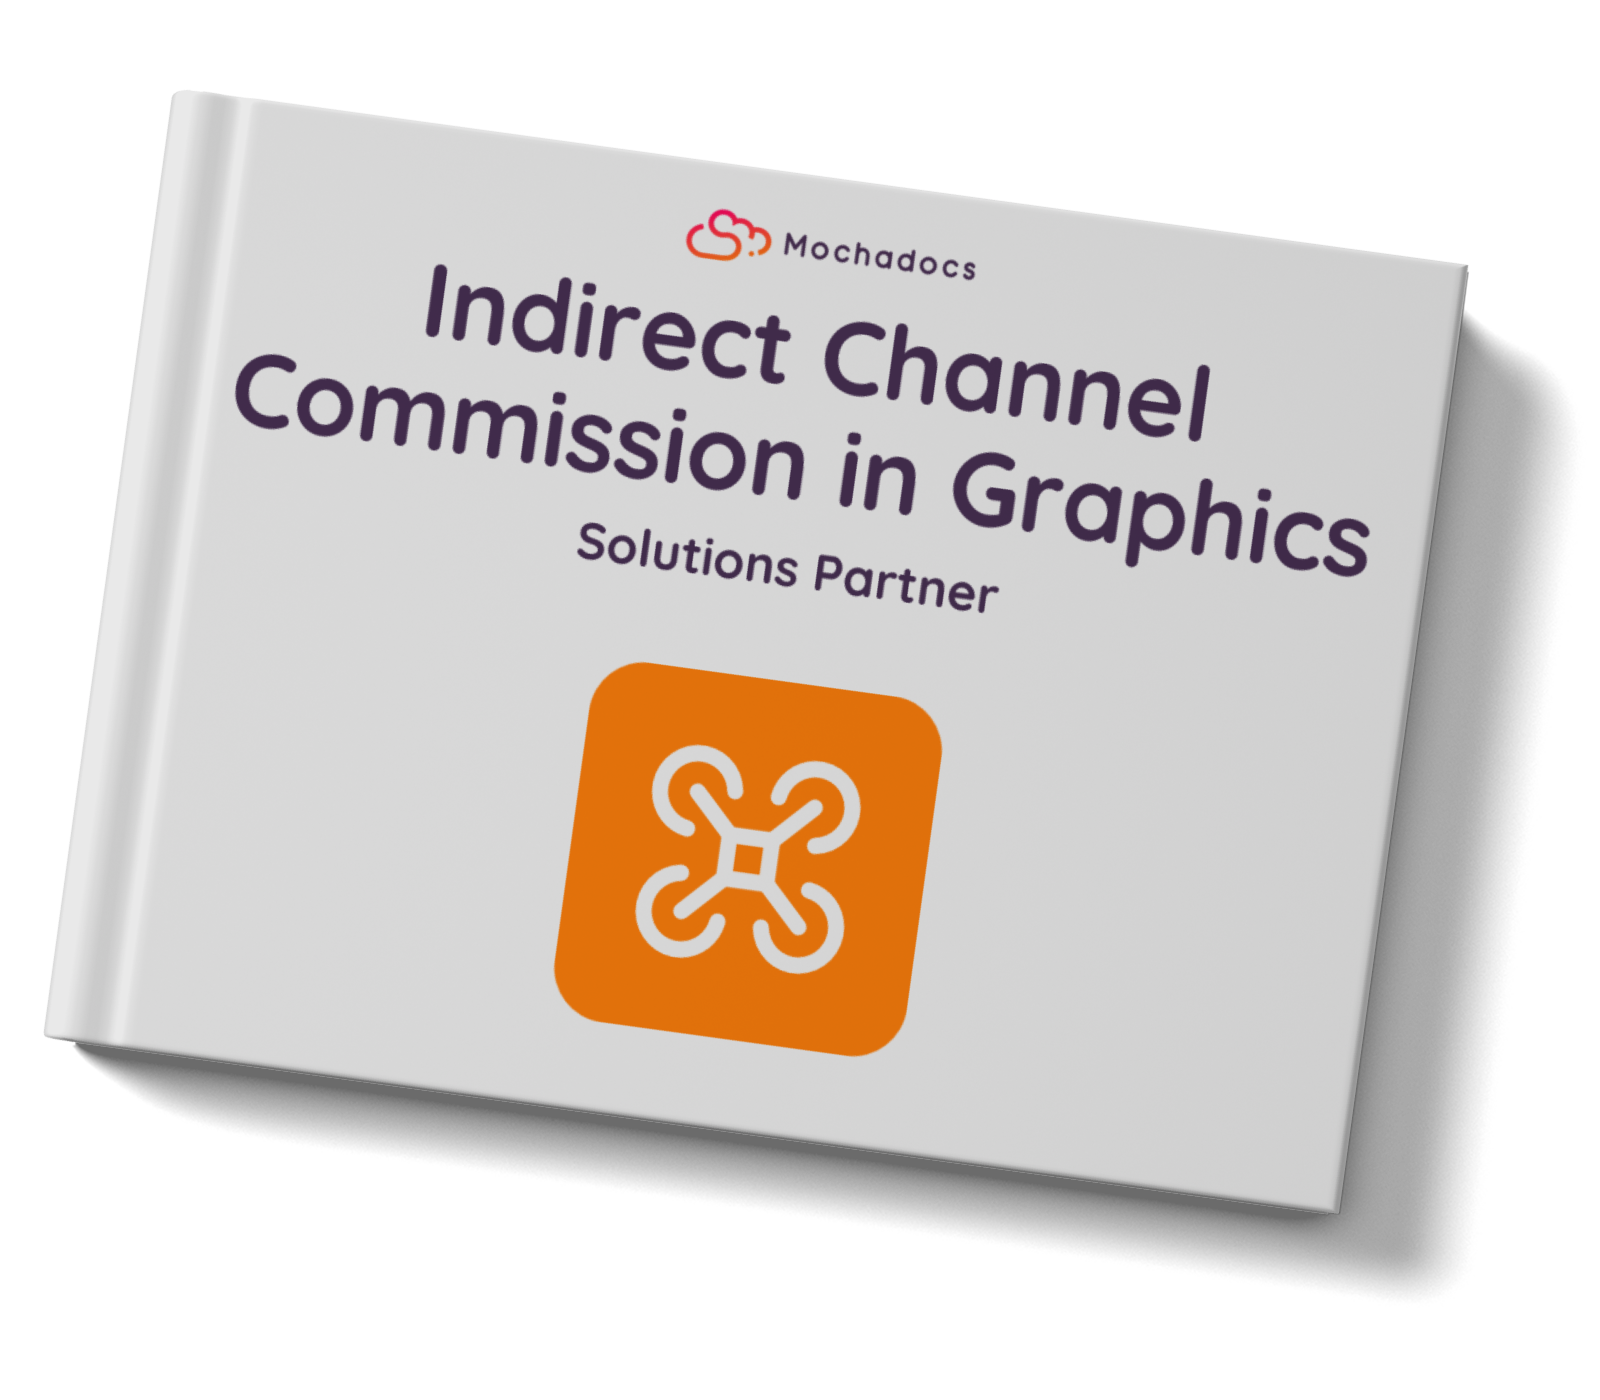 Indirect Channel - Commission in Graphics - Solutions Partner | Mochadocs